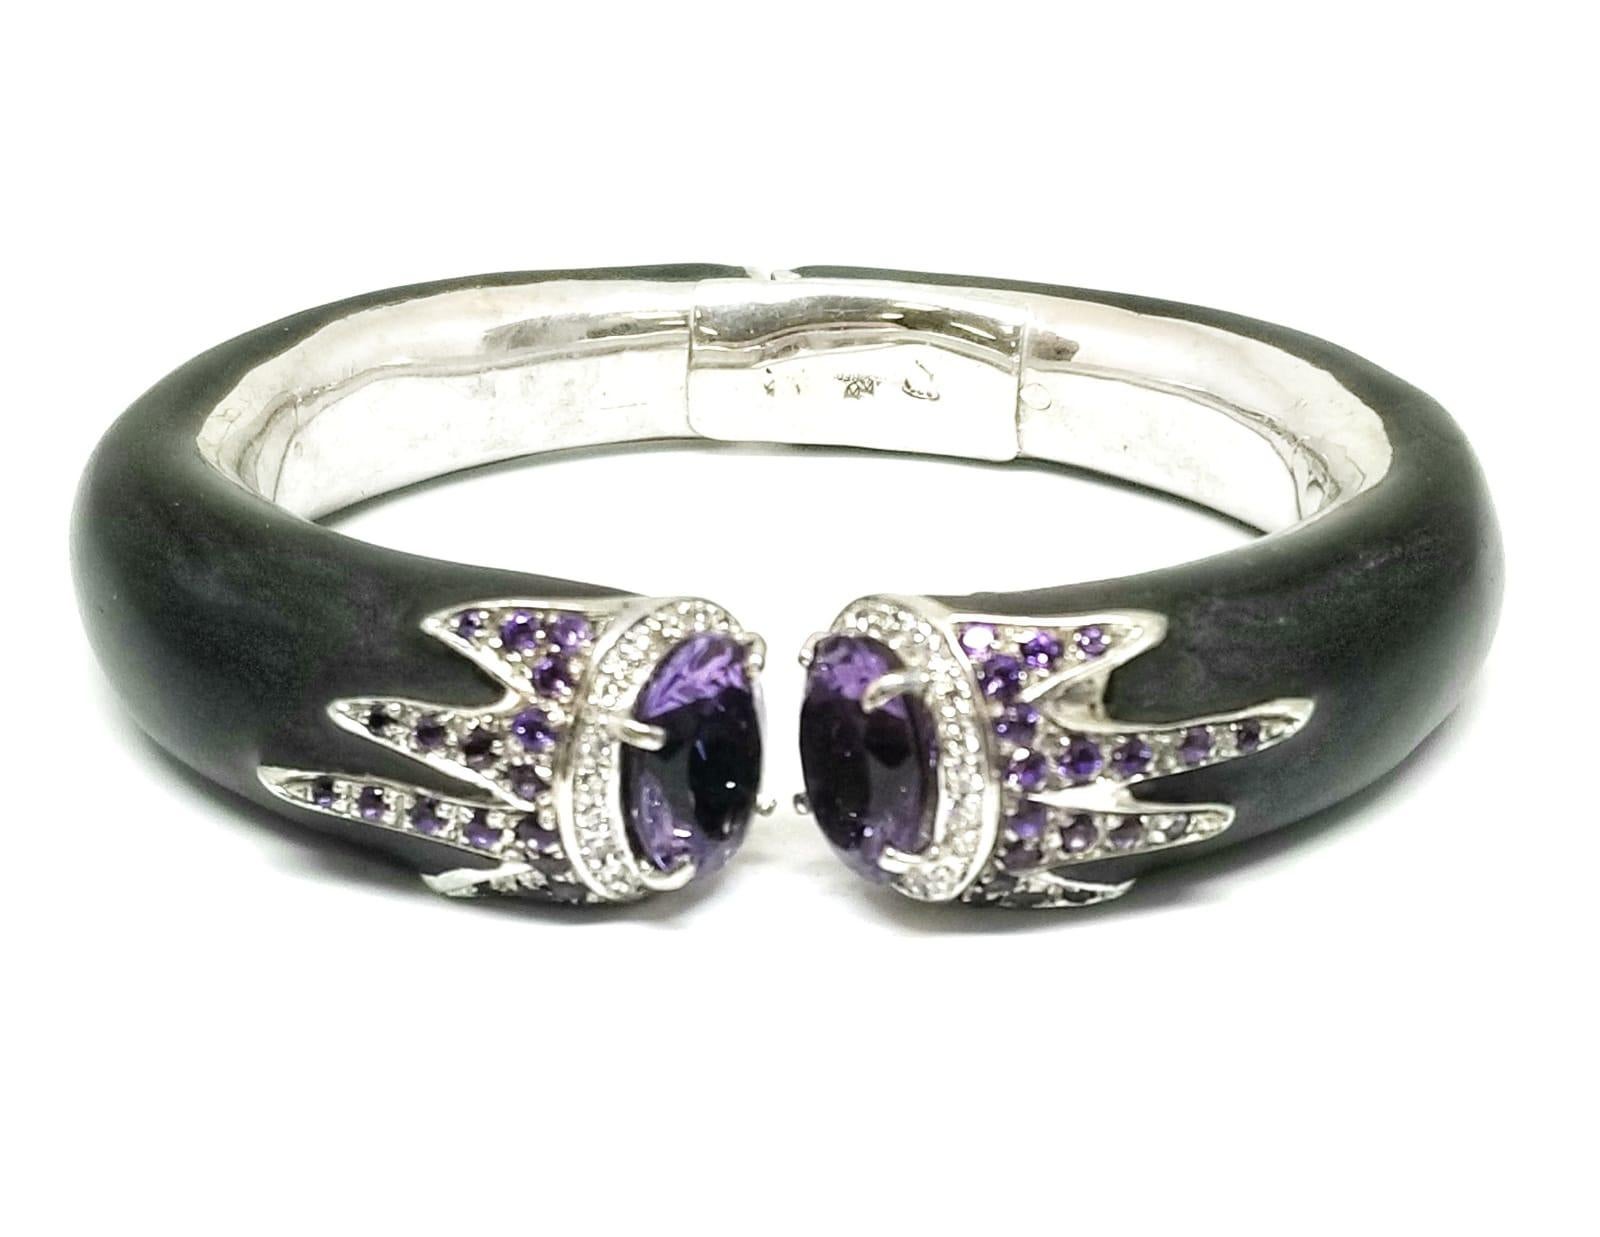 Andreoli Diamond Amethyst Black Enamel 18 Karat Gold and Silver Bracelet

This bracelet features:
- 0.62 Carat Diamond
- 8.02 Carat Amethyst
- Black Enamel
- 18K Gold & Silver
- Made In Italy